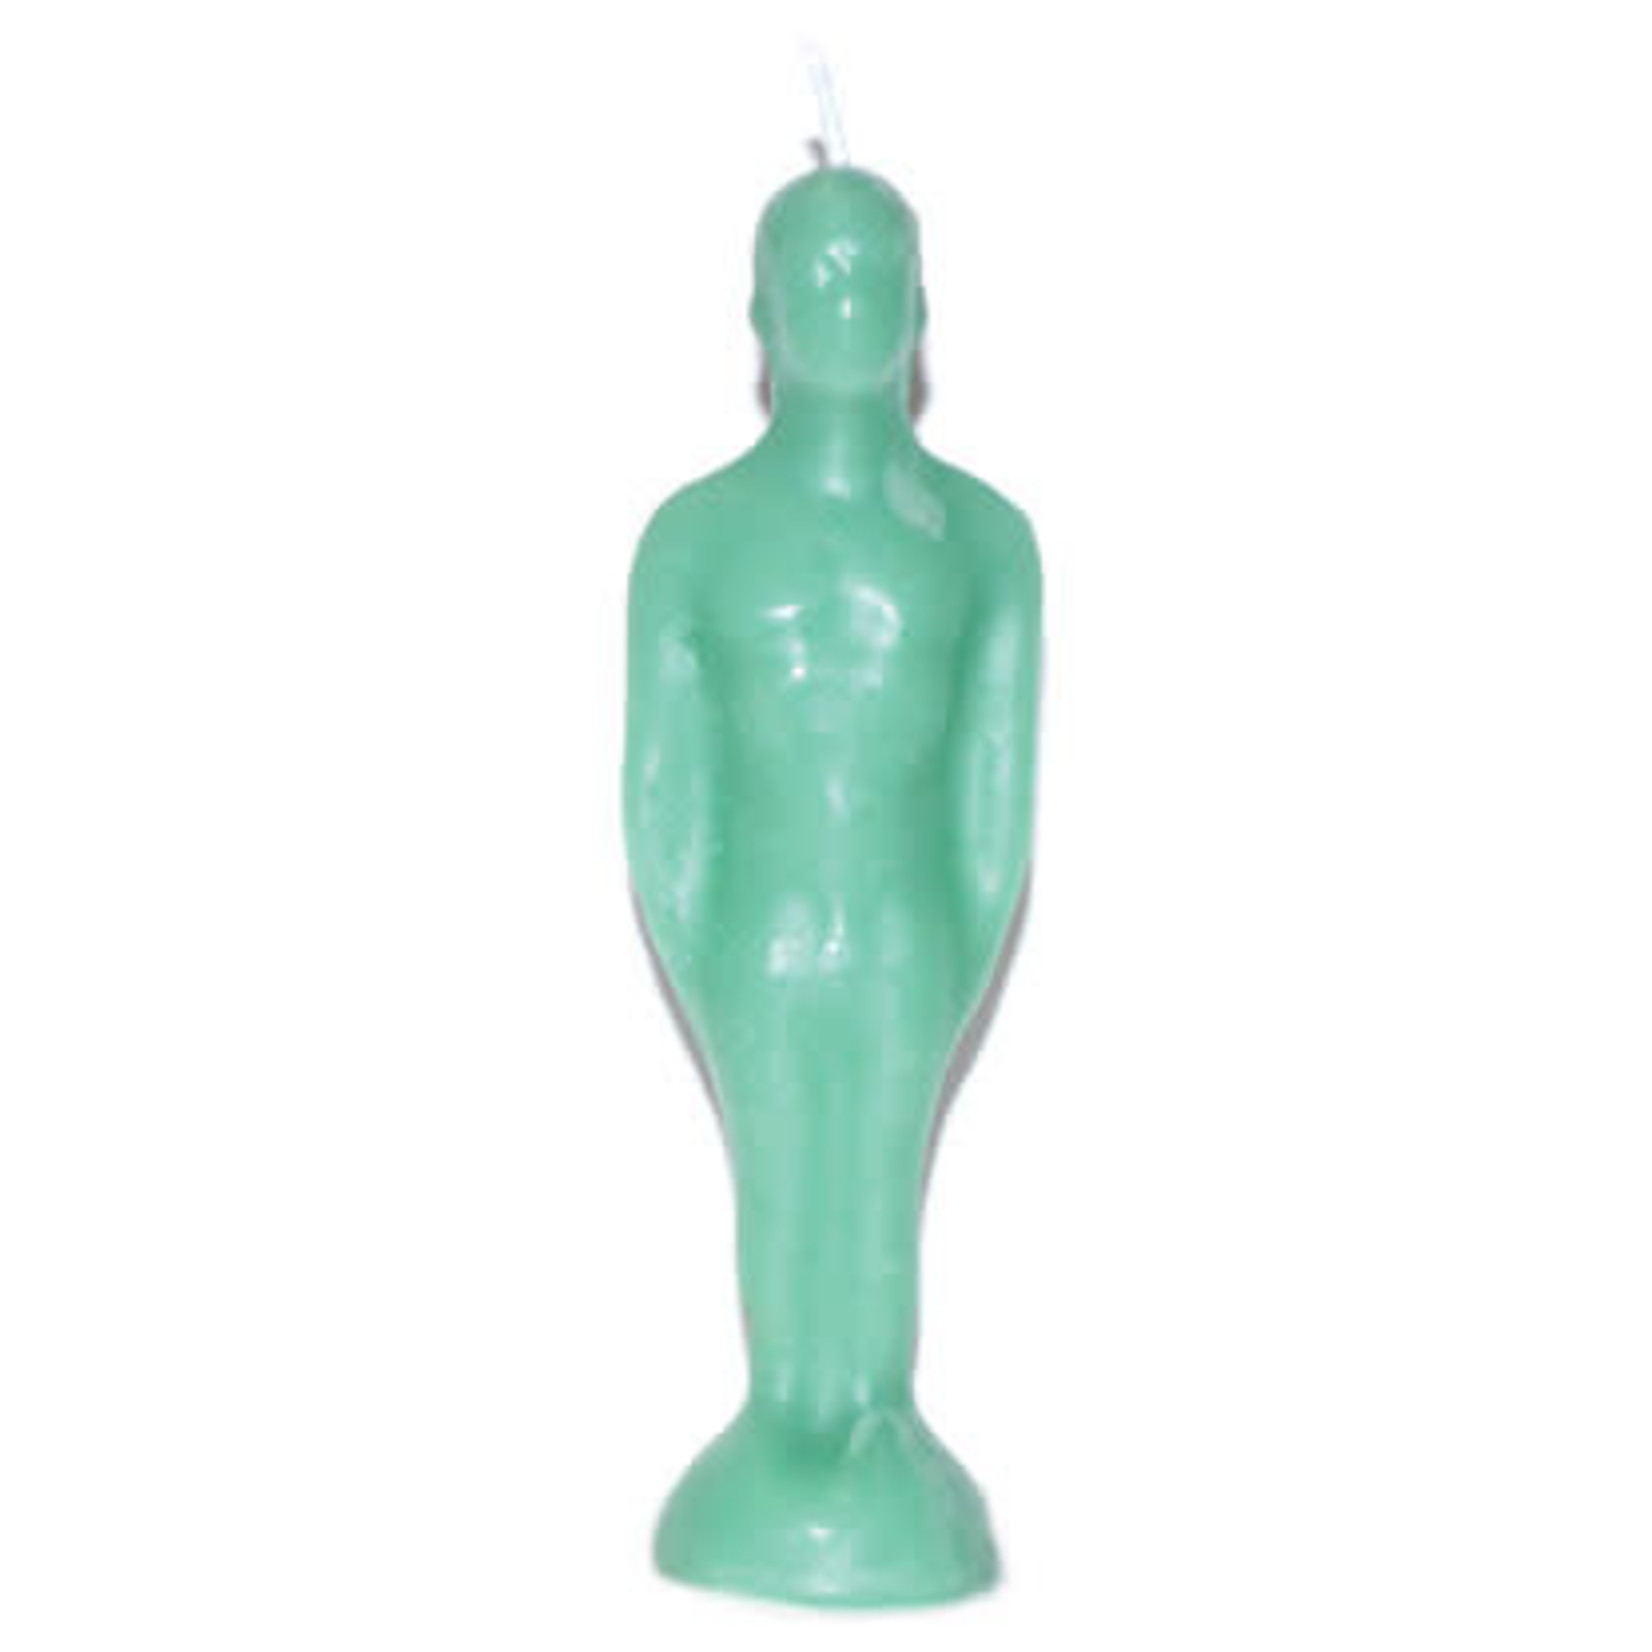 7" Green Male Figure Candle